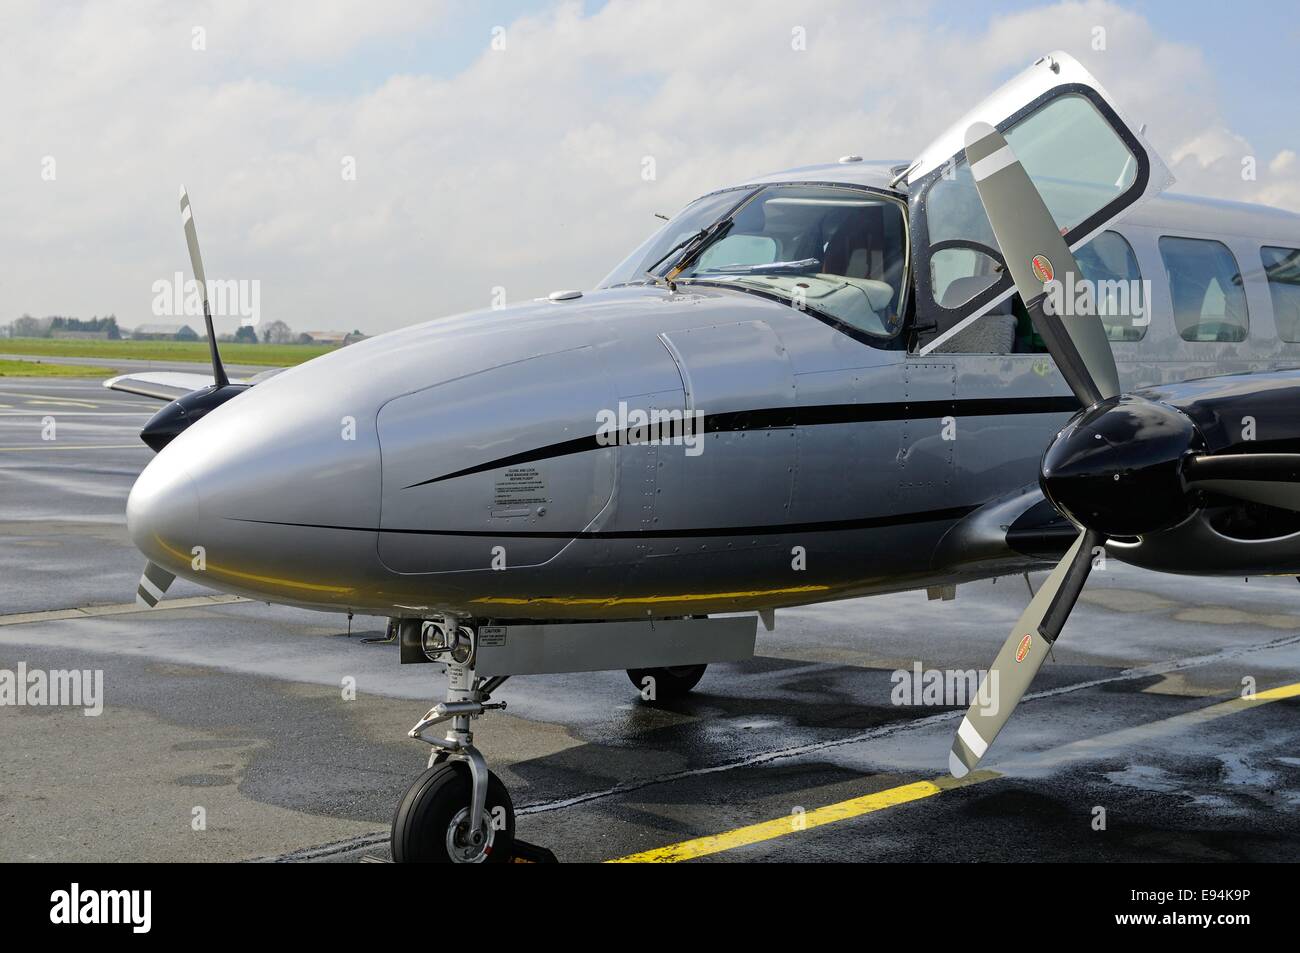 Front side view of a Piper Chieftain twin-engined aircraft sitting on a tarmac air strip Stock Photo